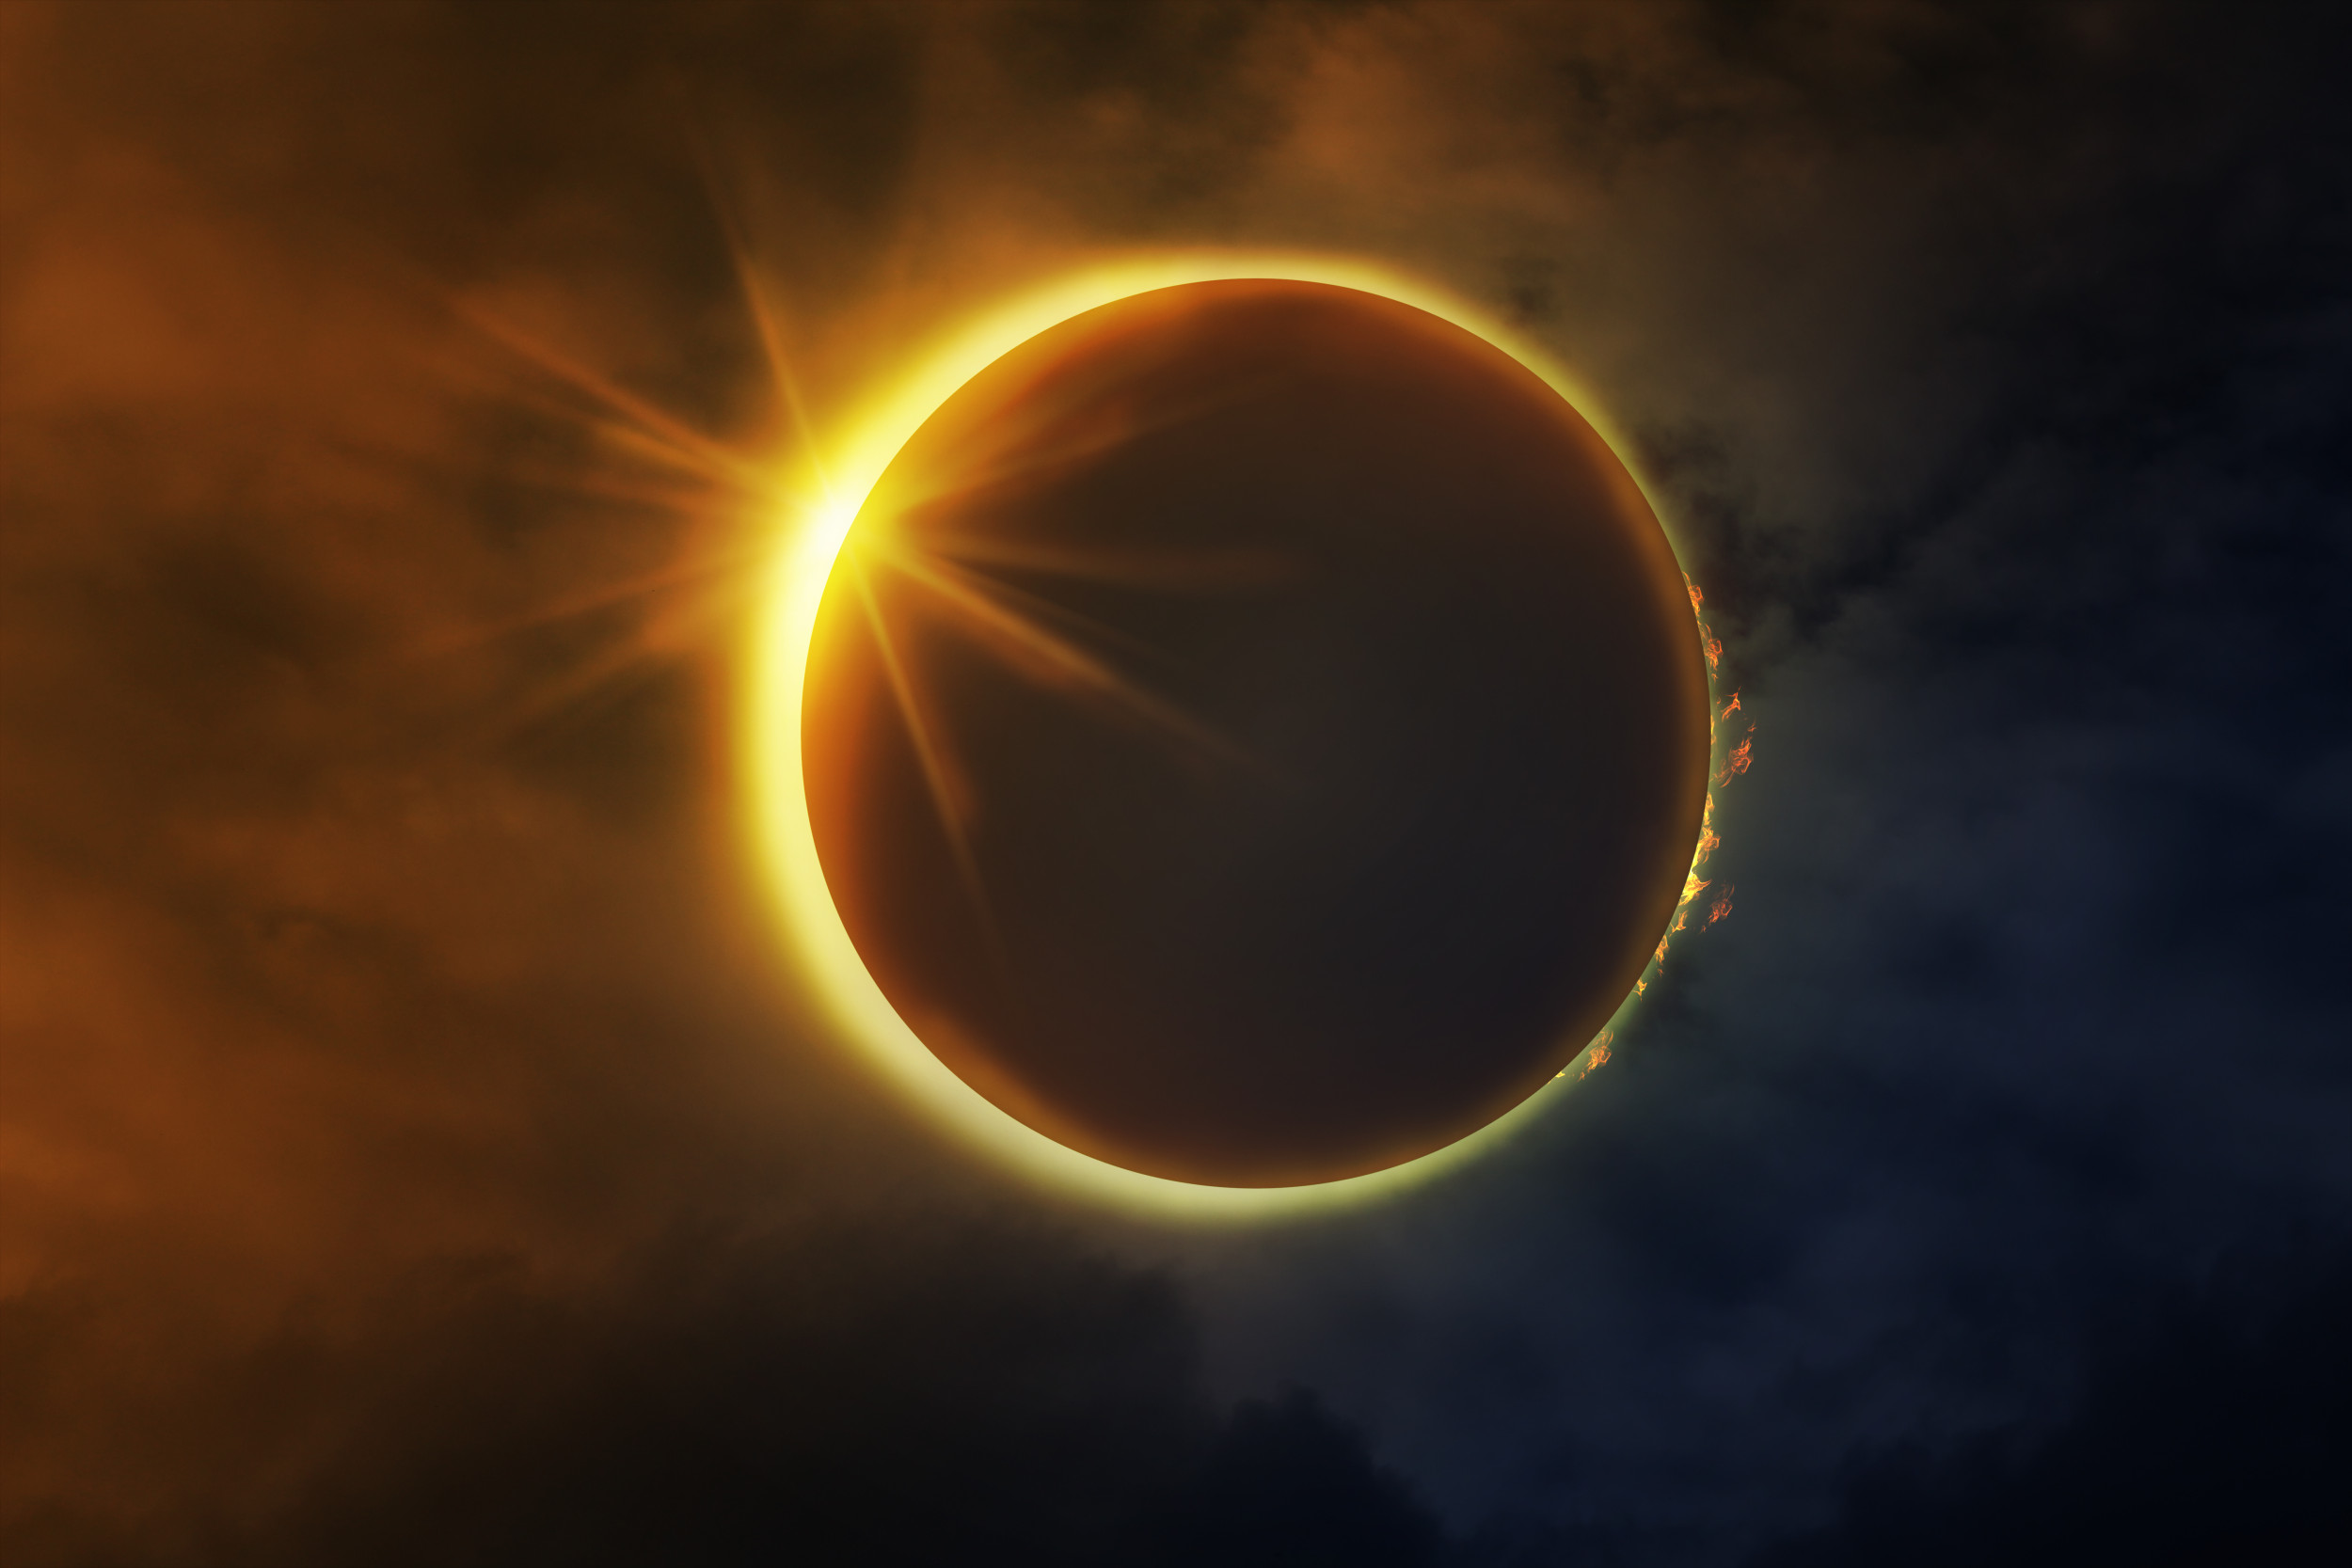 Huge Explosions Emitting From Sun May Be Possible During Solar Eclipse